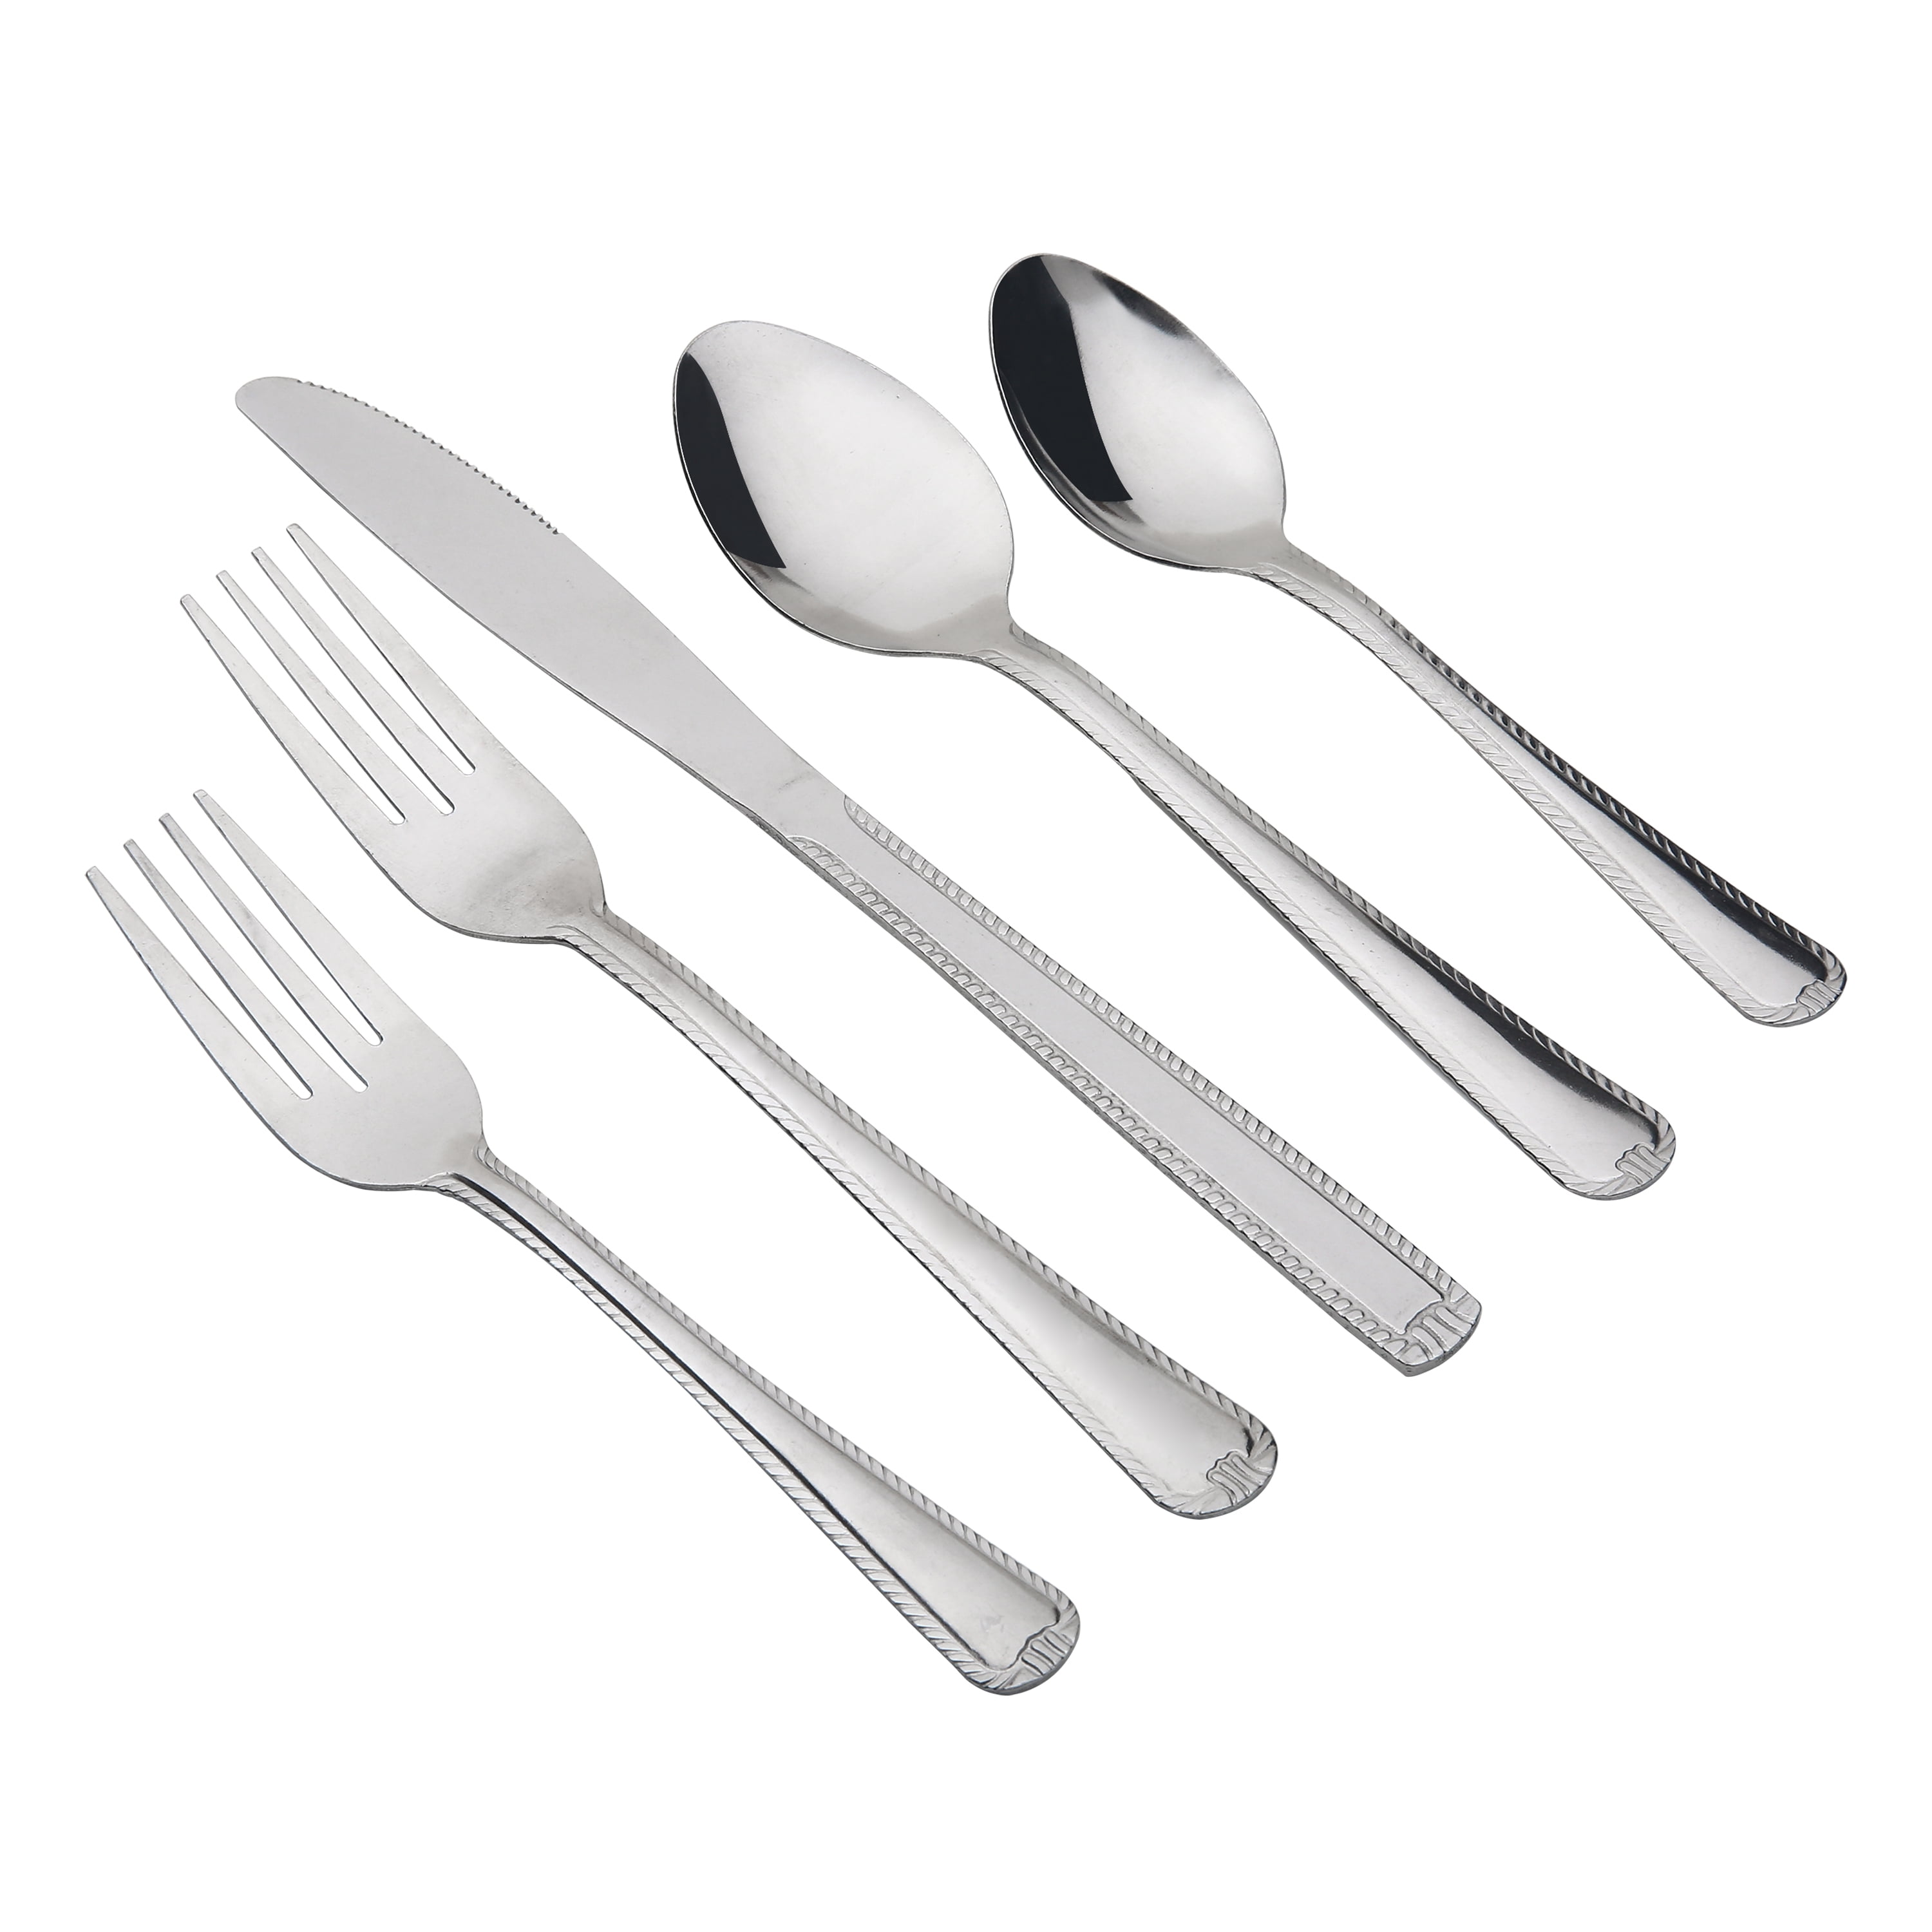 Mainstays 49-piece Lace Stainless Steel Flatware Set with Tray Organizer, Silver Tableware